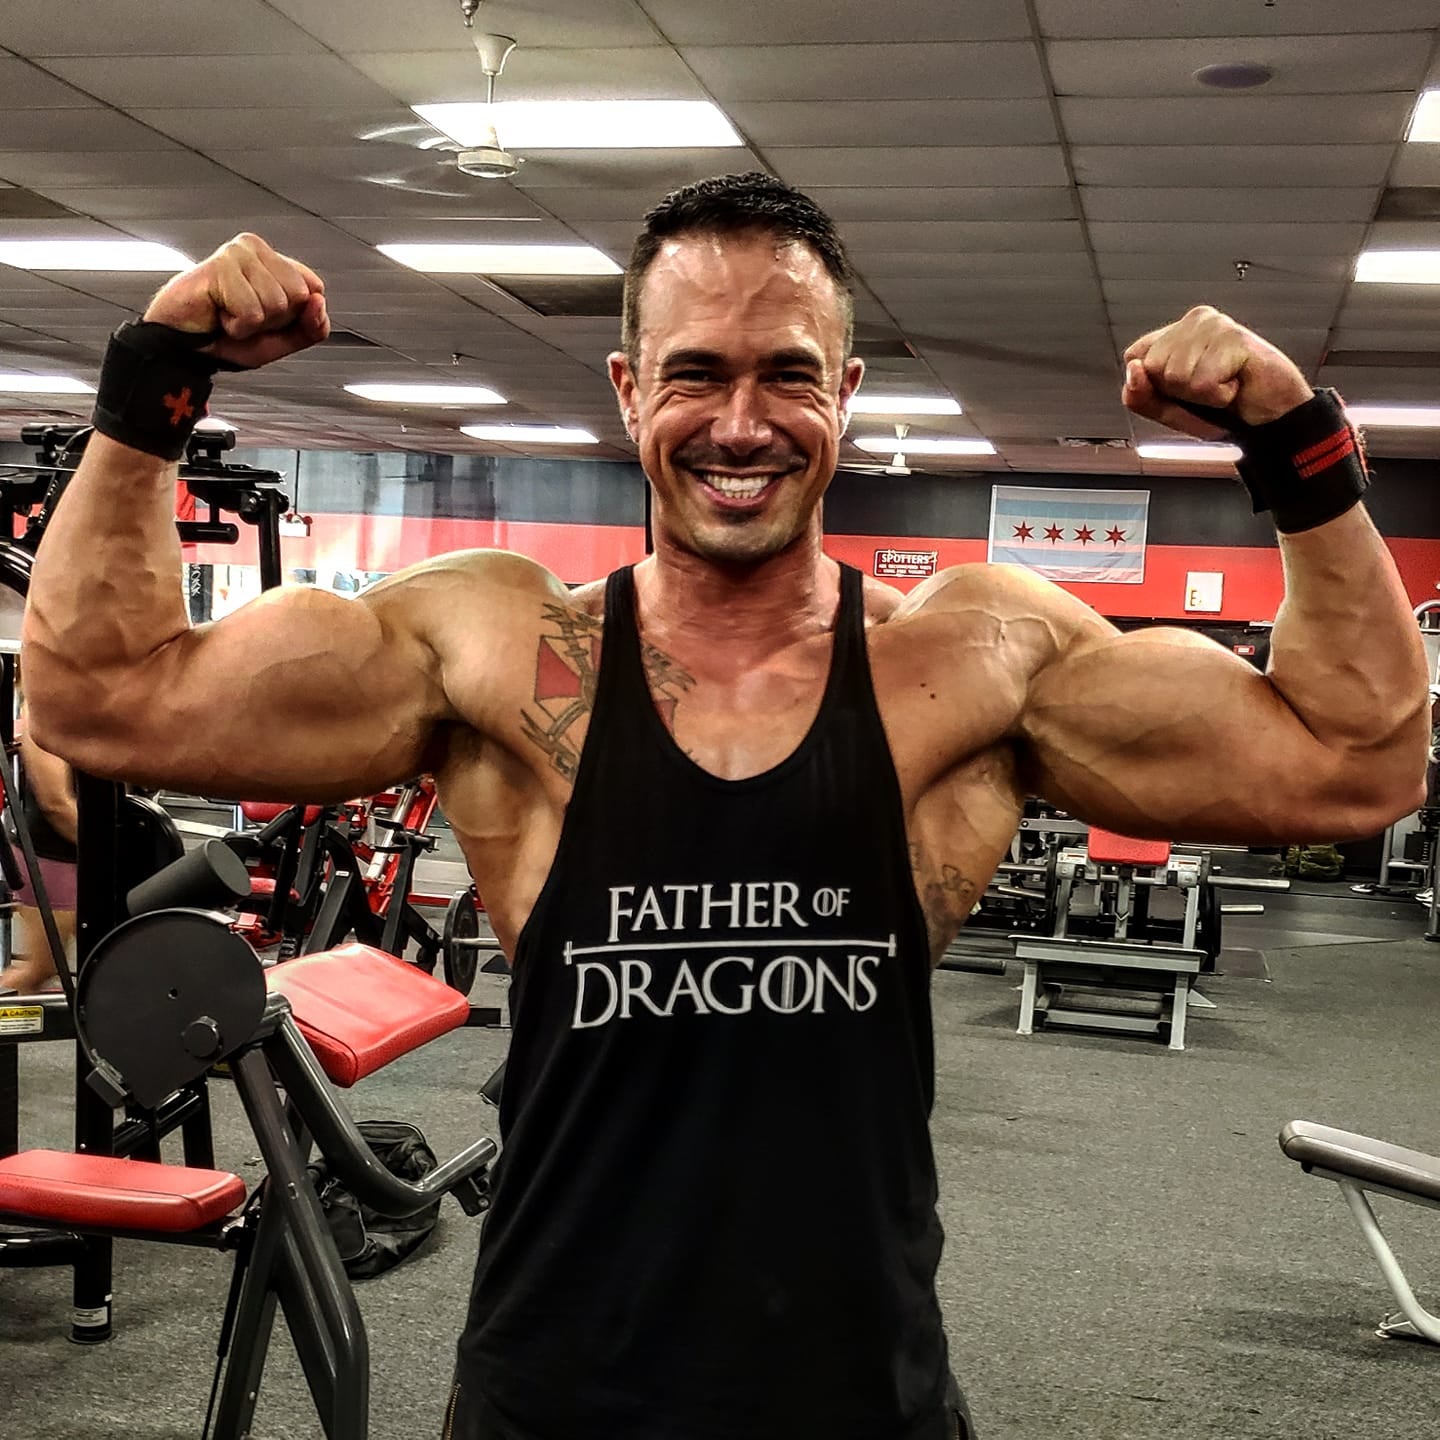 EXCLUSIVE: Bodybuilder Nick Balazs Does Heavy Lifting For Dogecoin